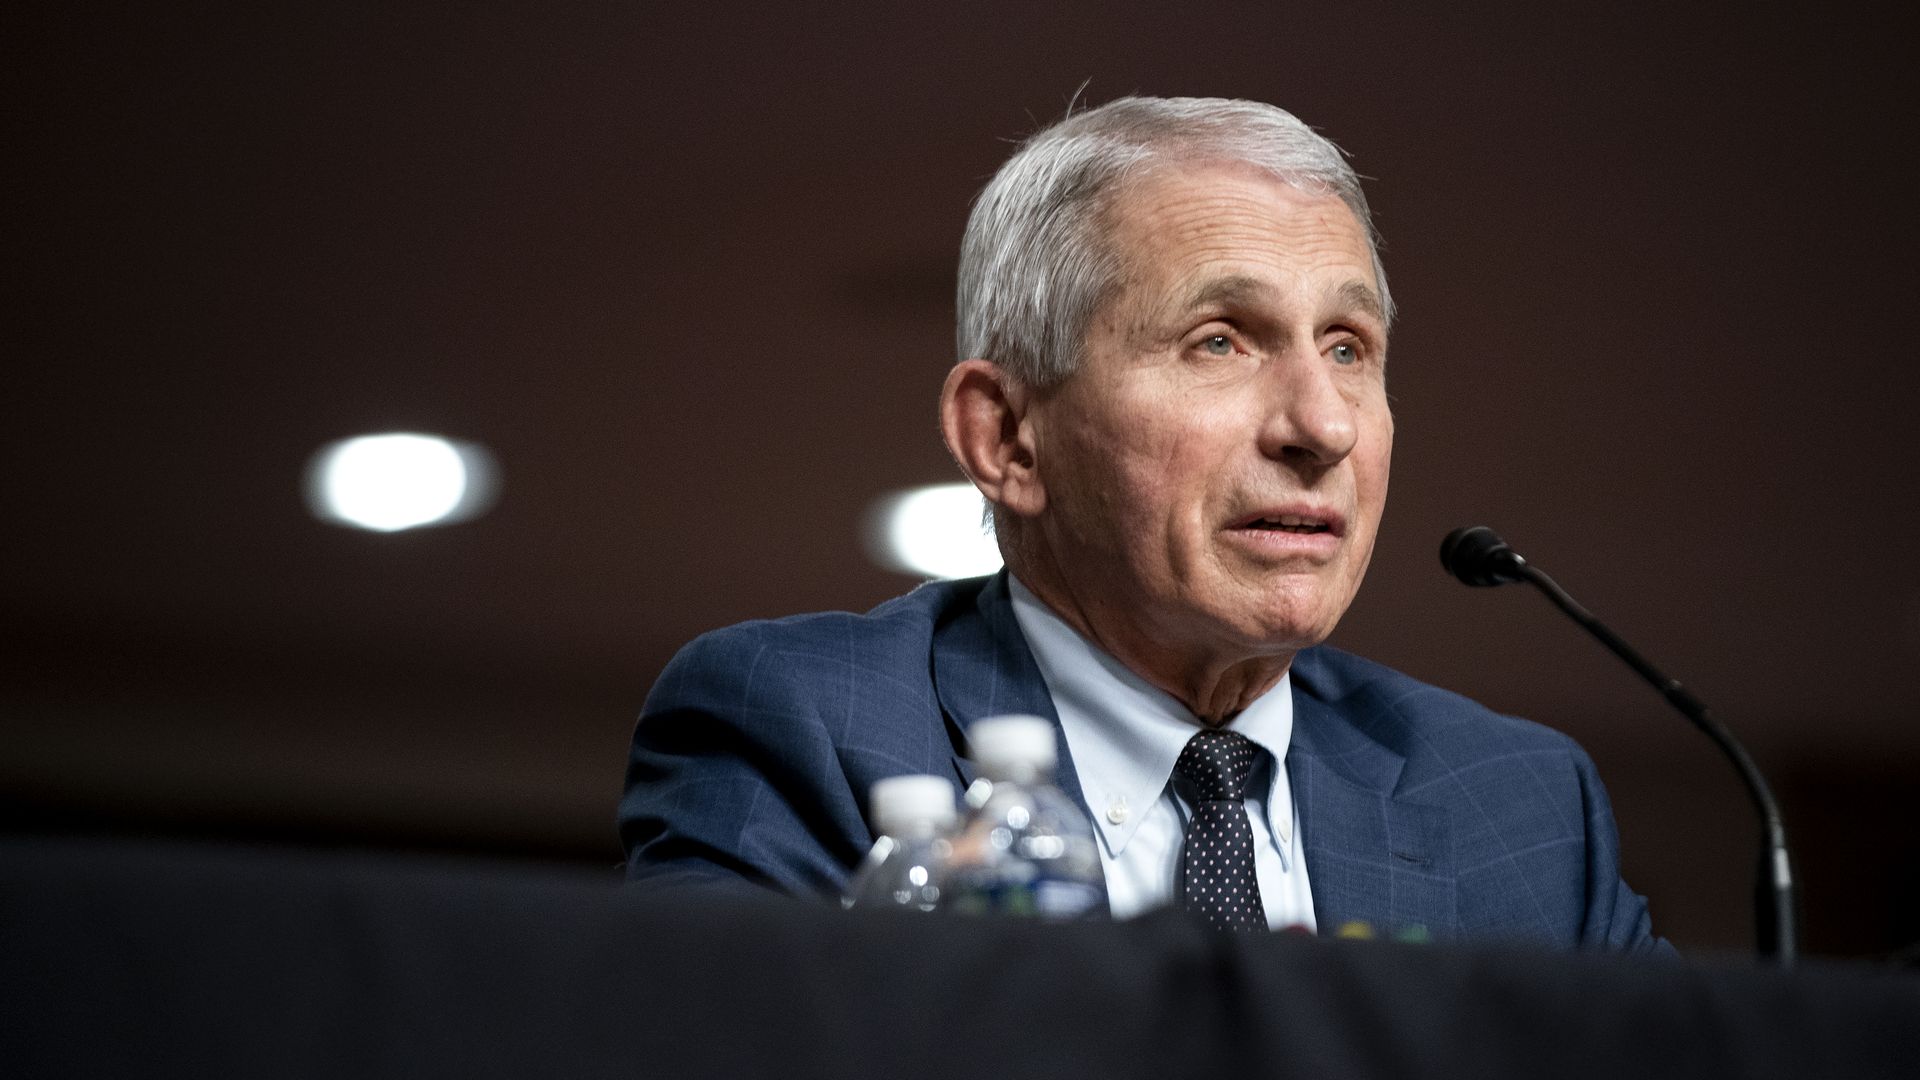 Dr. Anthony Fauci, White House Chief Medical Advisor and Director of the NIAID, testifies at a Senate Health, Education, Labor, and Pensions Committee hearing on Capitol Hill on January 11, 2022